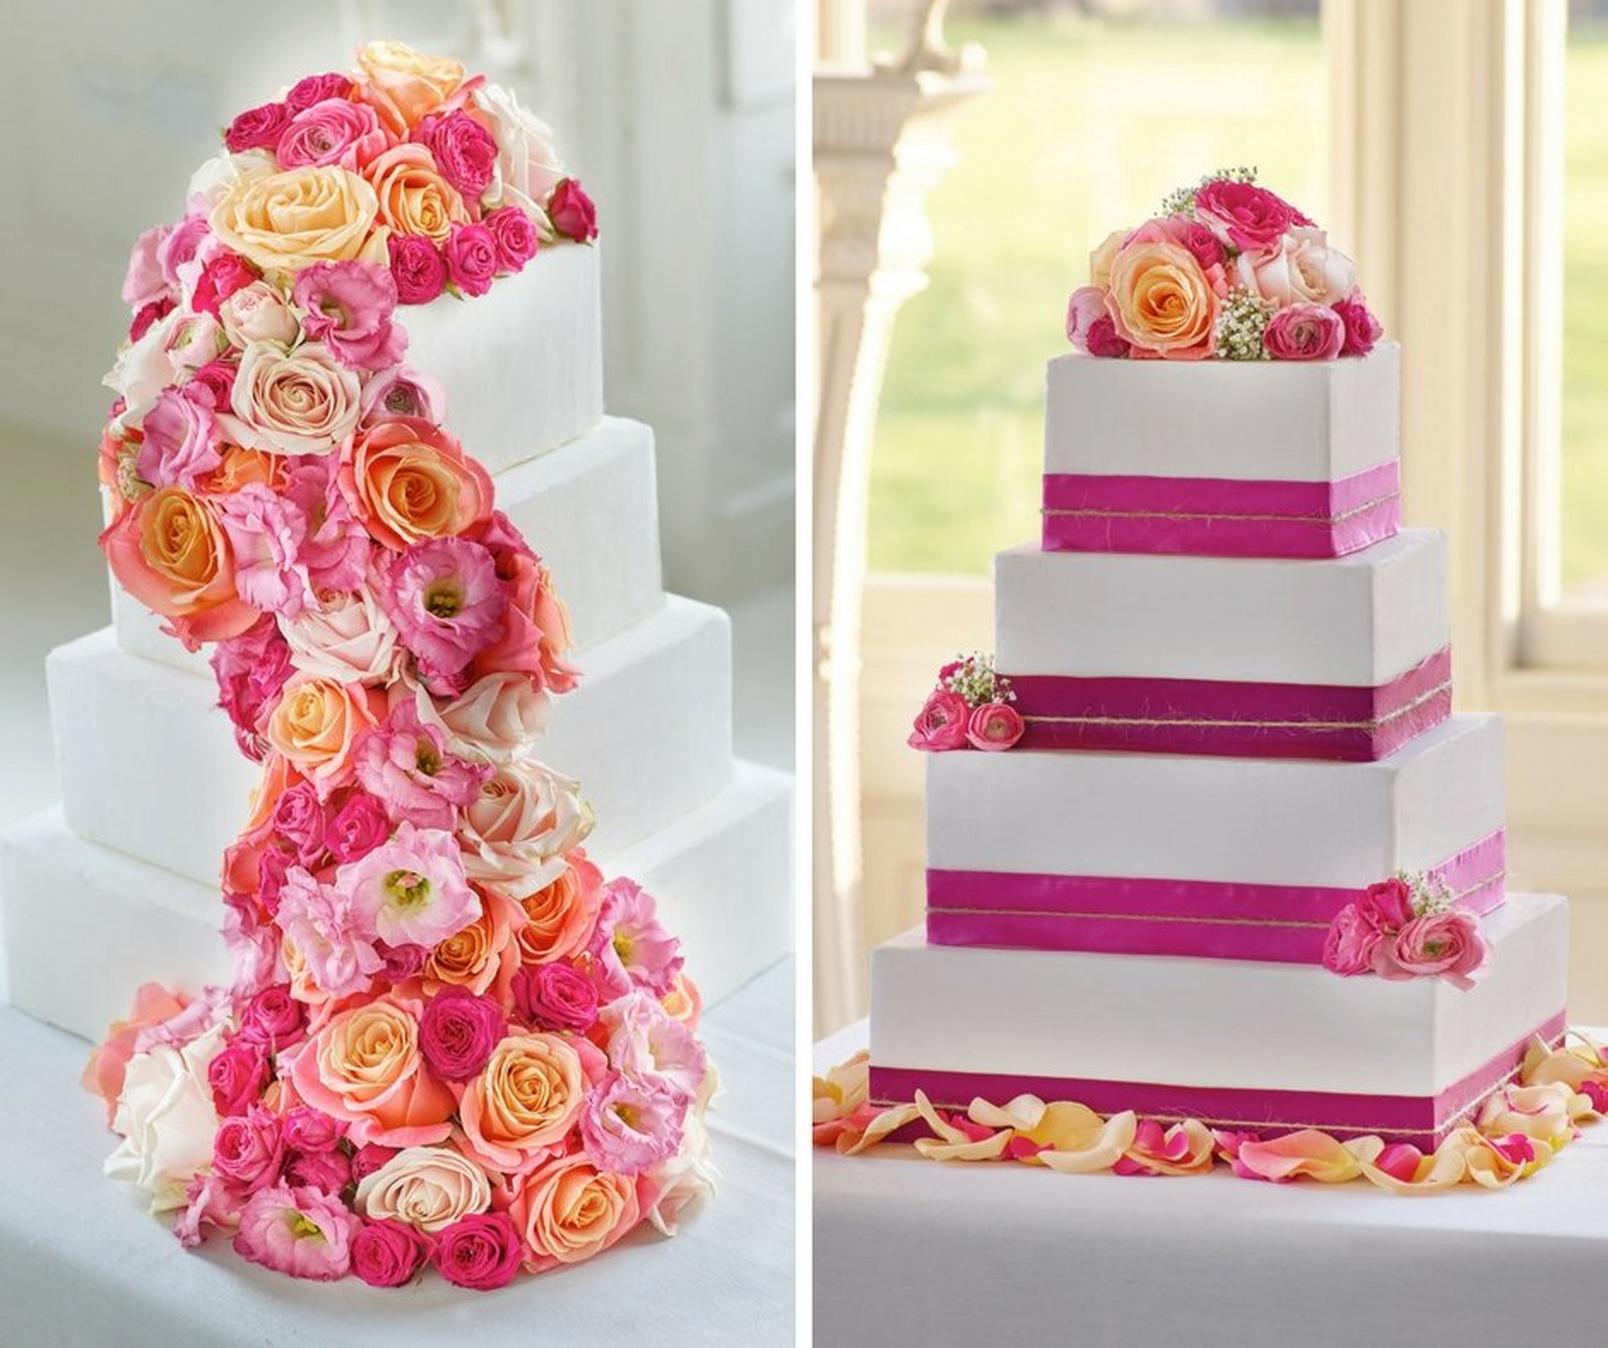 Wedding Cakes Decorated with Real Flowers | Interflora